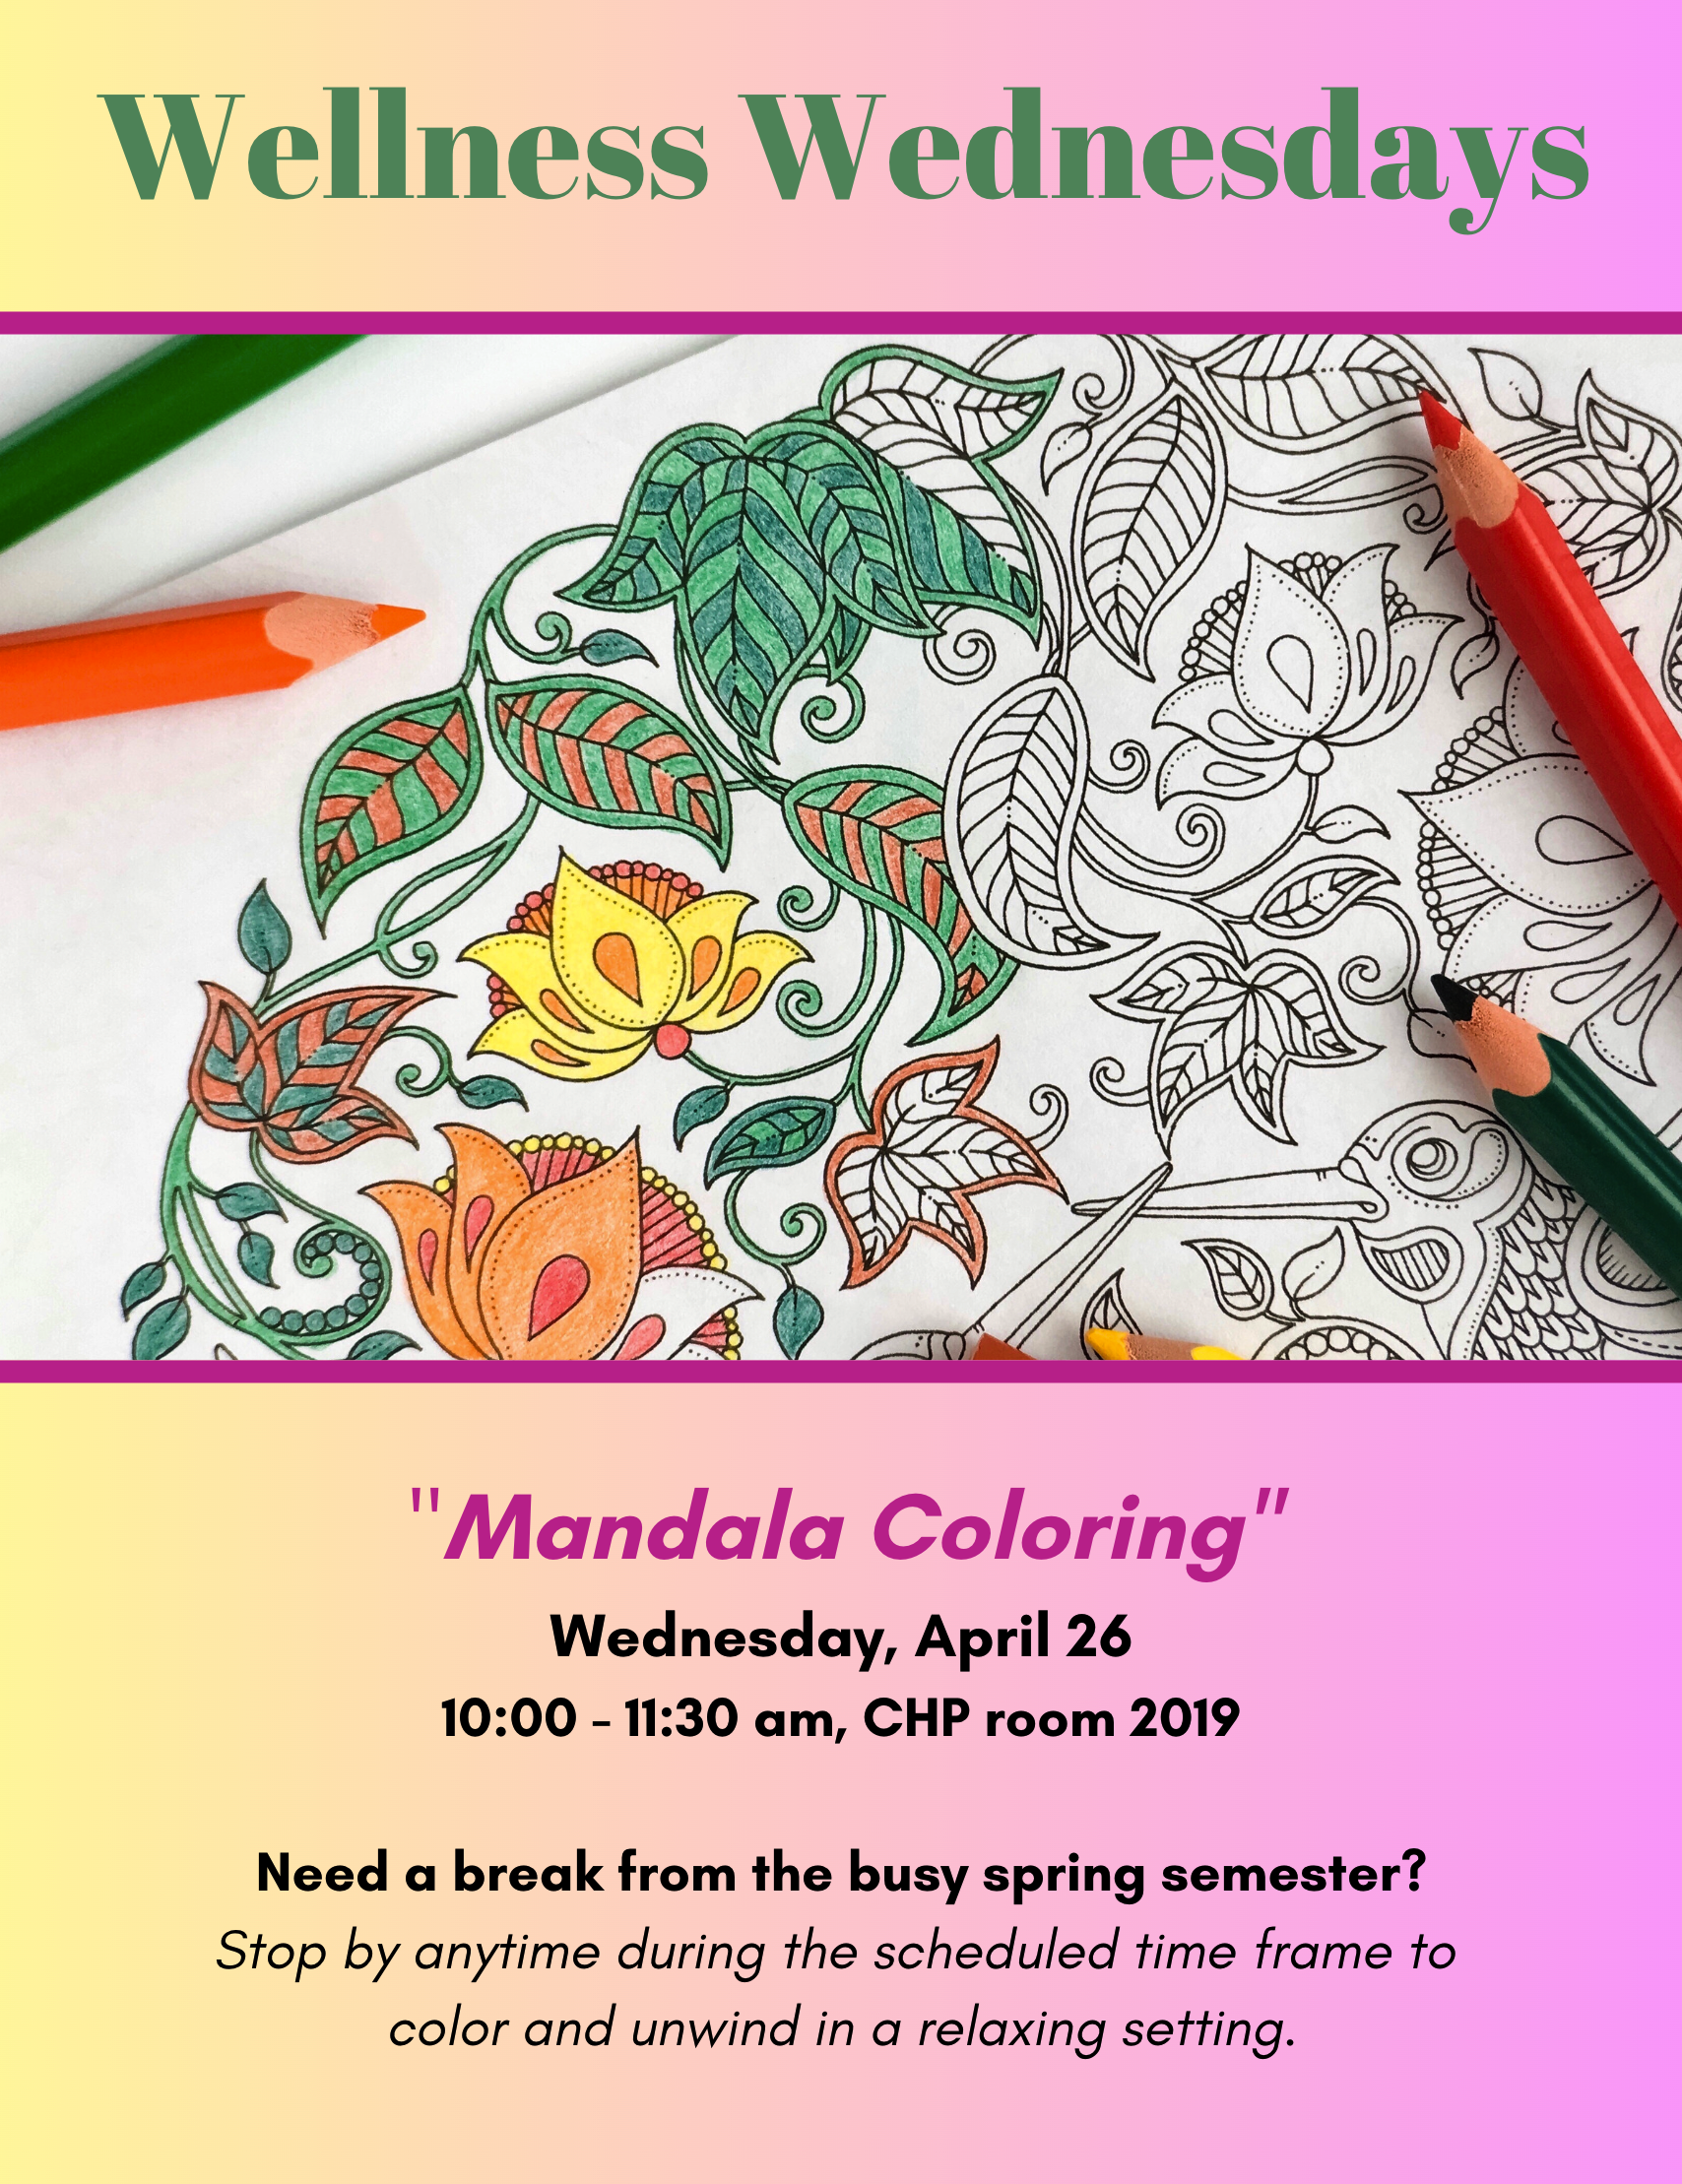 Wellness Wednesdays Mandala Coloring April 26 10-11:30 am CHP Room 2019 Need a break from the busy spring semester? Stop by anytime during the scheduled time frame to color and unwind in a relaxing setting.